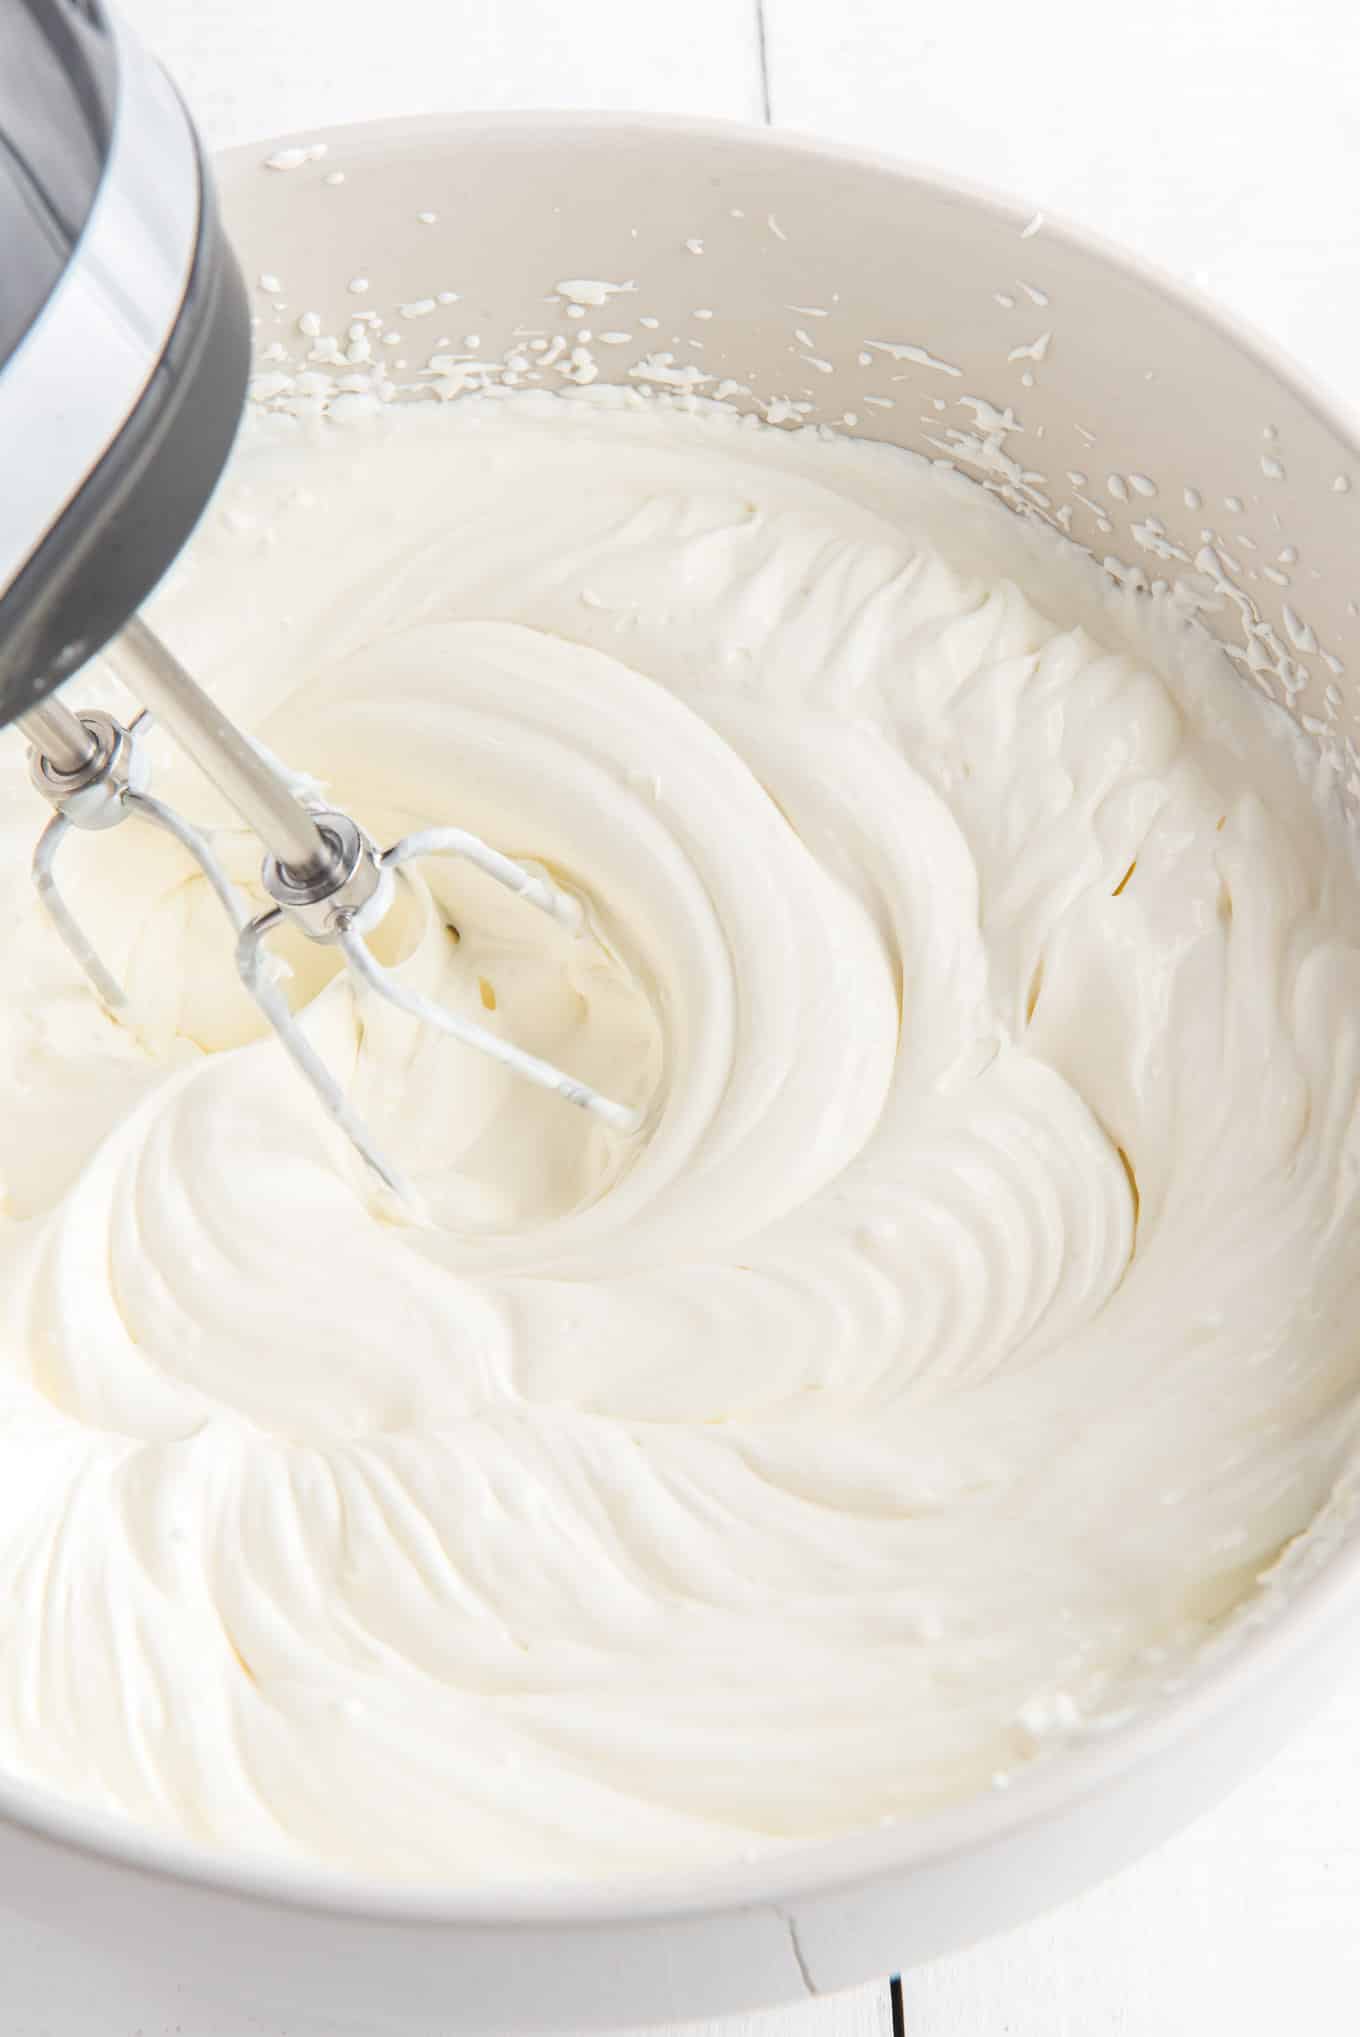 Mixing the cream cheese and sour cream together with an electric mixer.